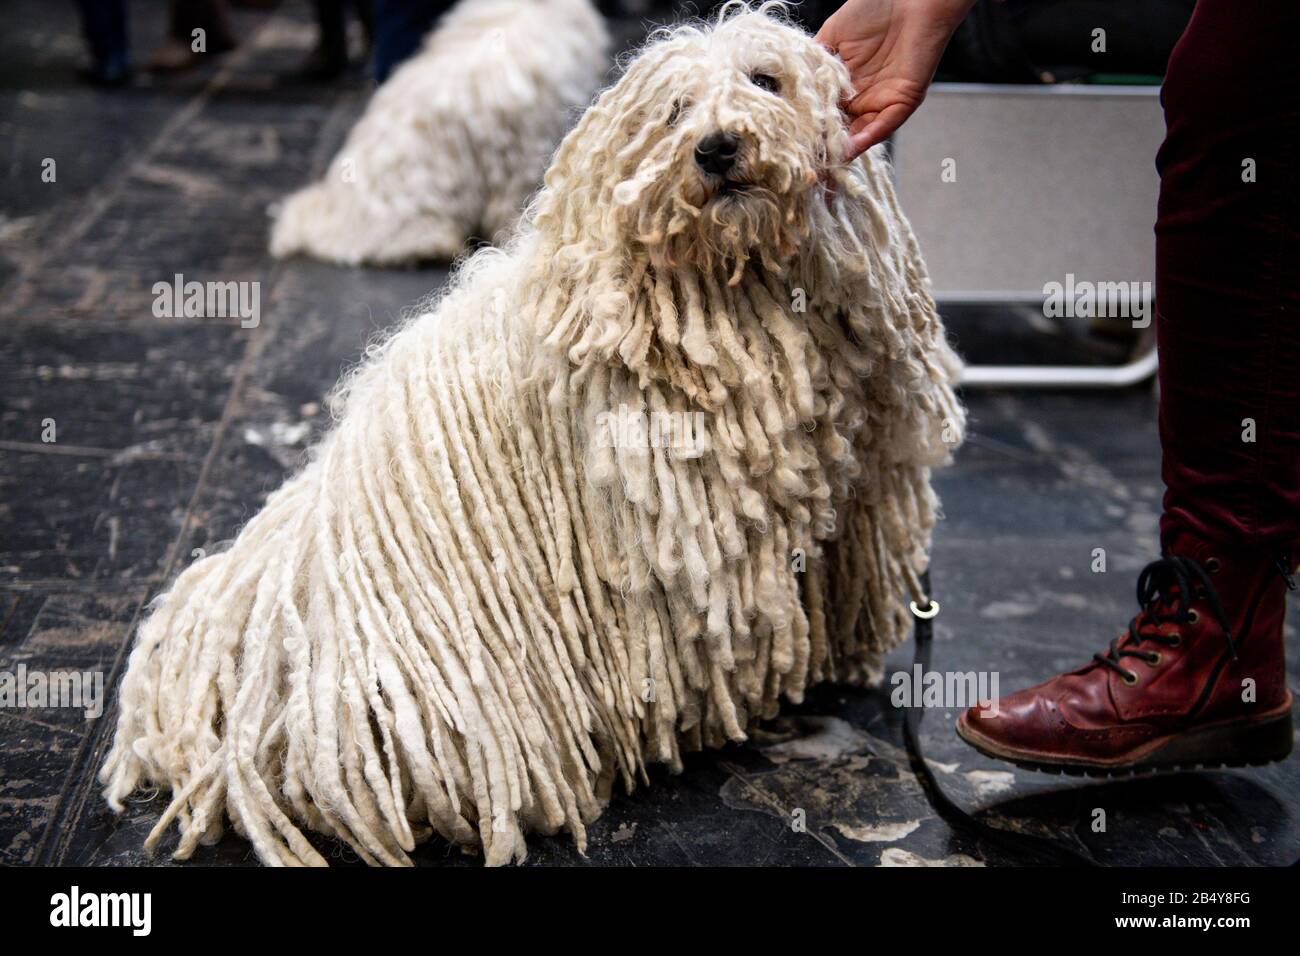 A Hungarian Puli at the Birmingham National Exhibition Centre (NEC) during the third day of the Crufts Dog Show. Stock Photo